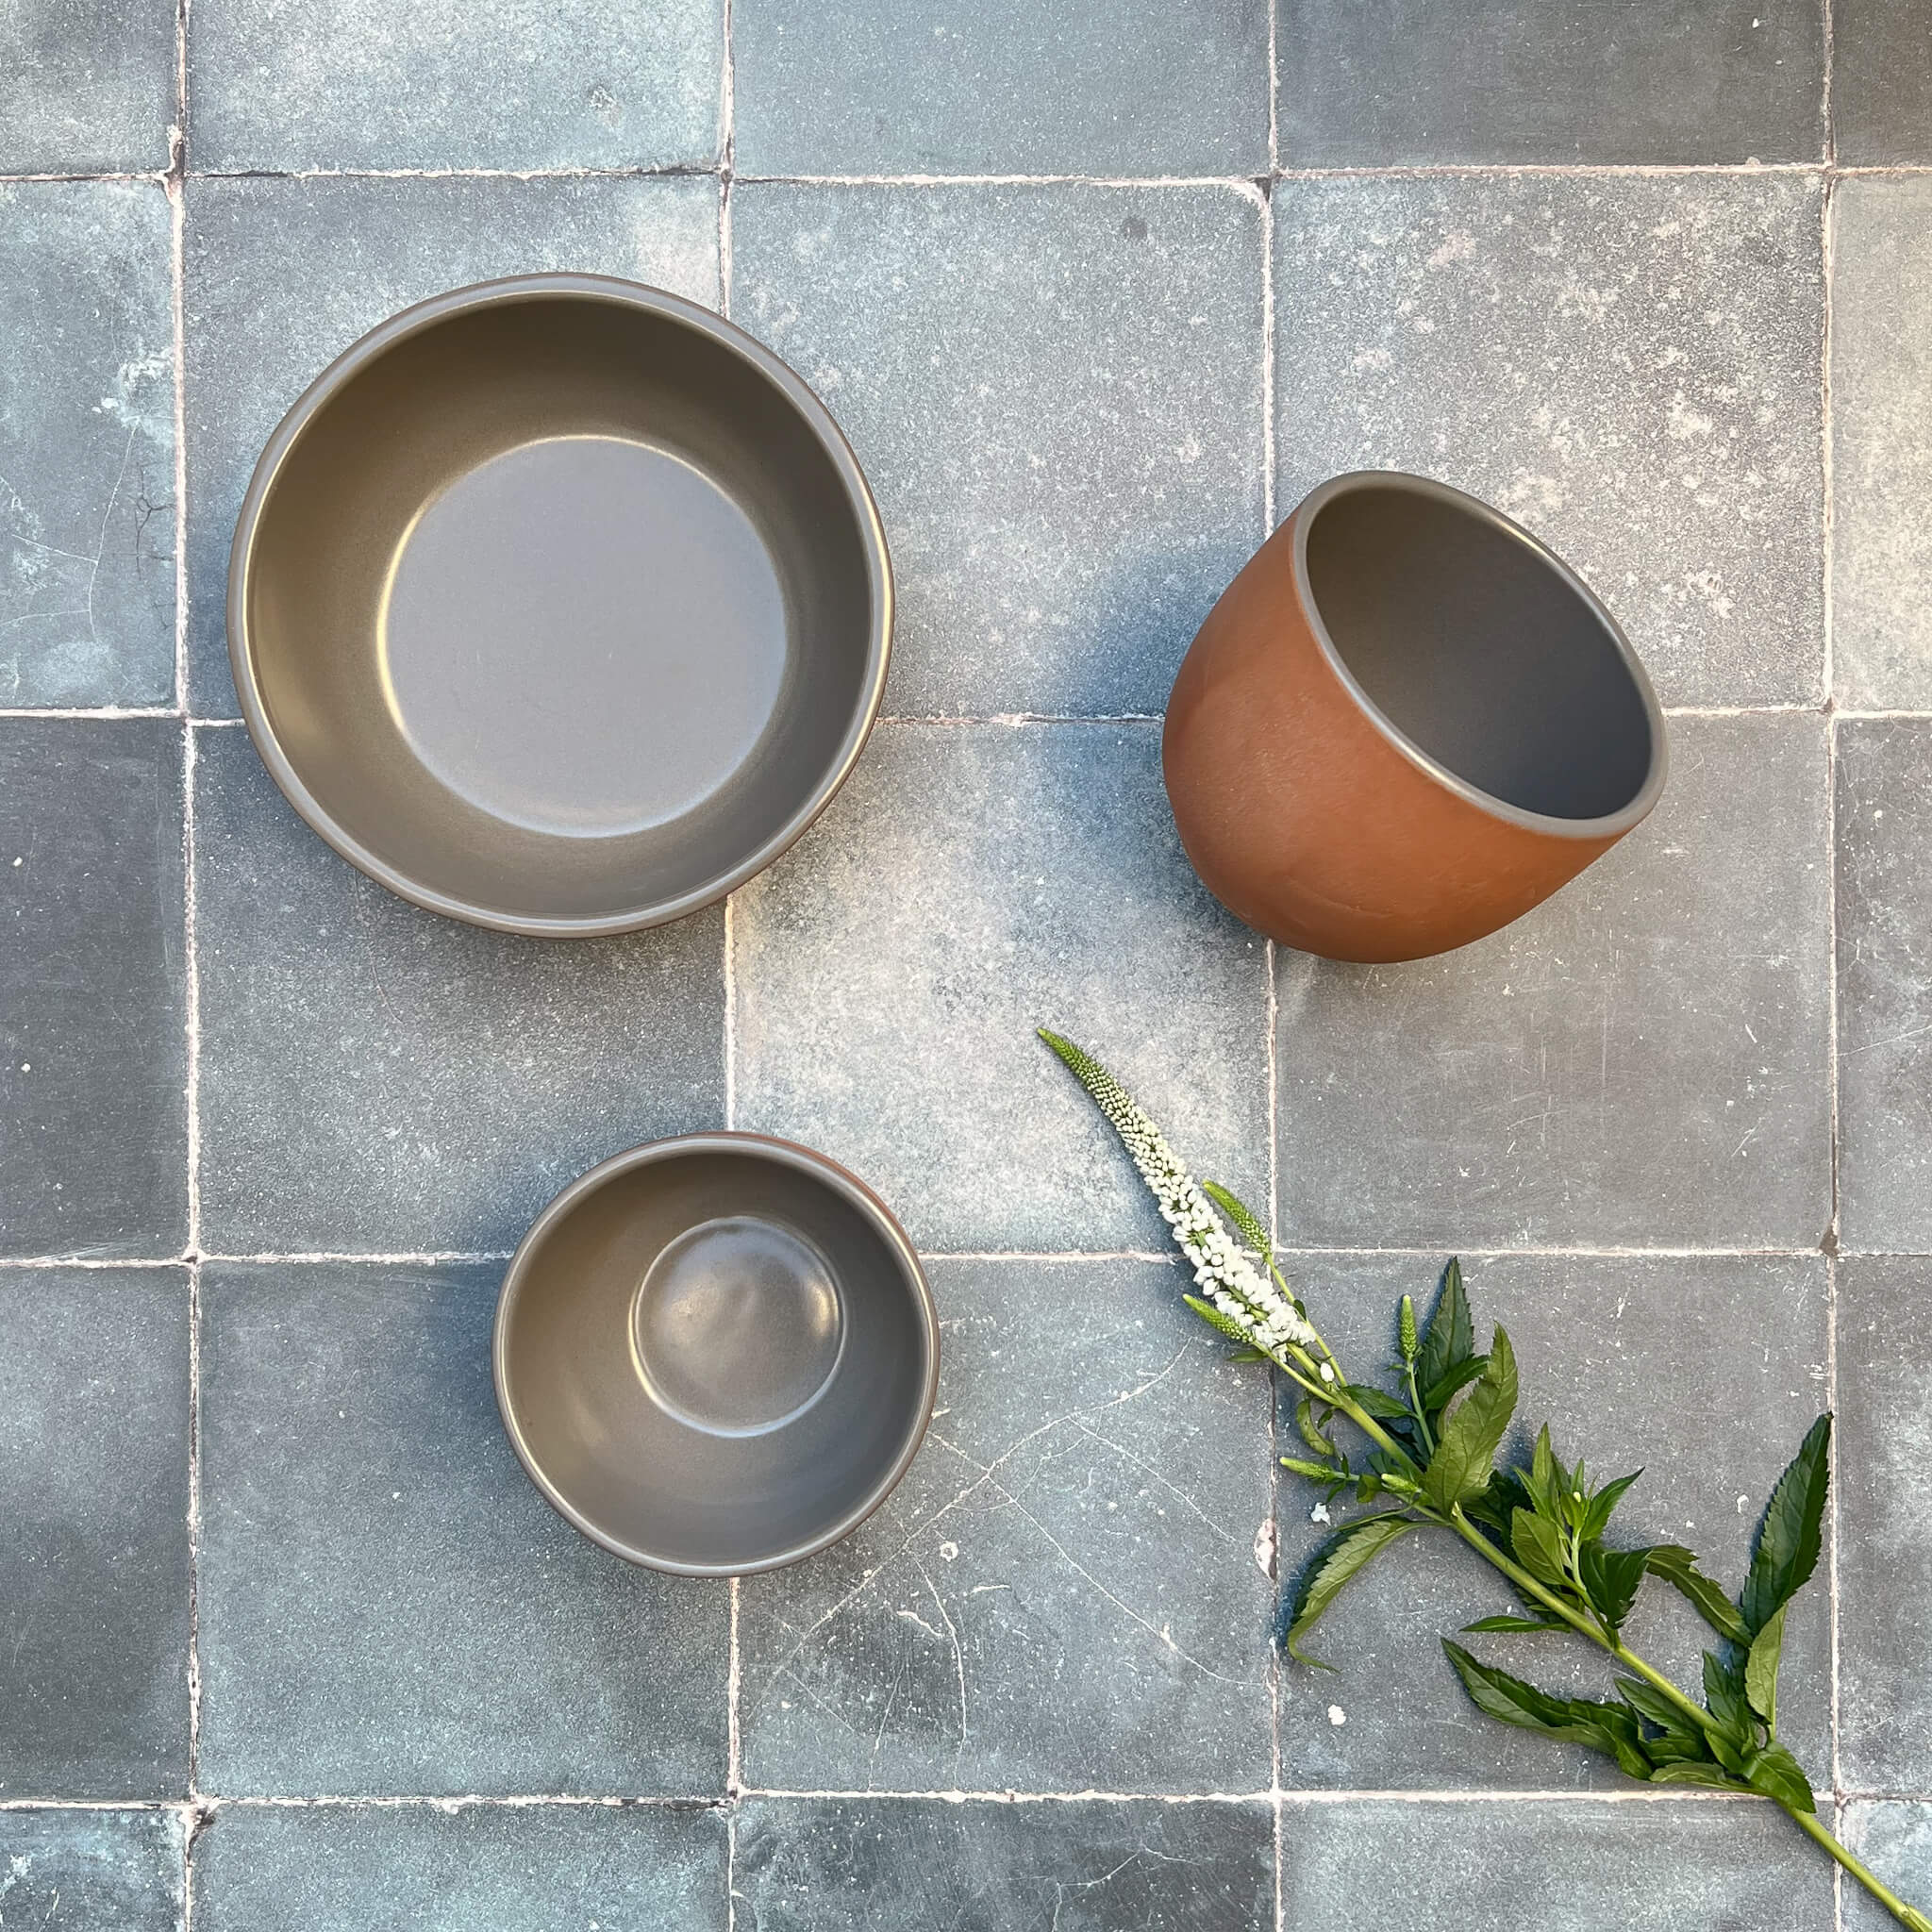 A collection of terracotta bowls with gray glazed interior.